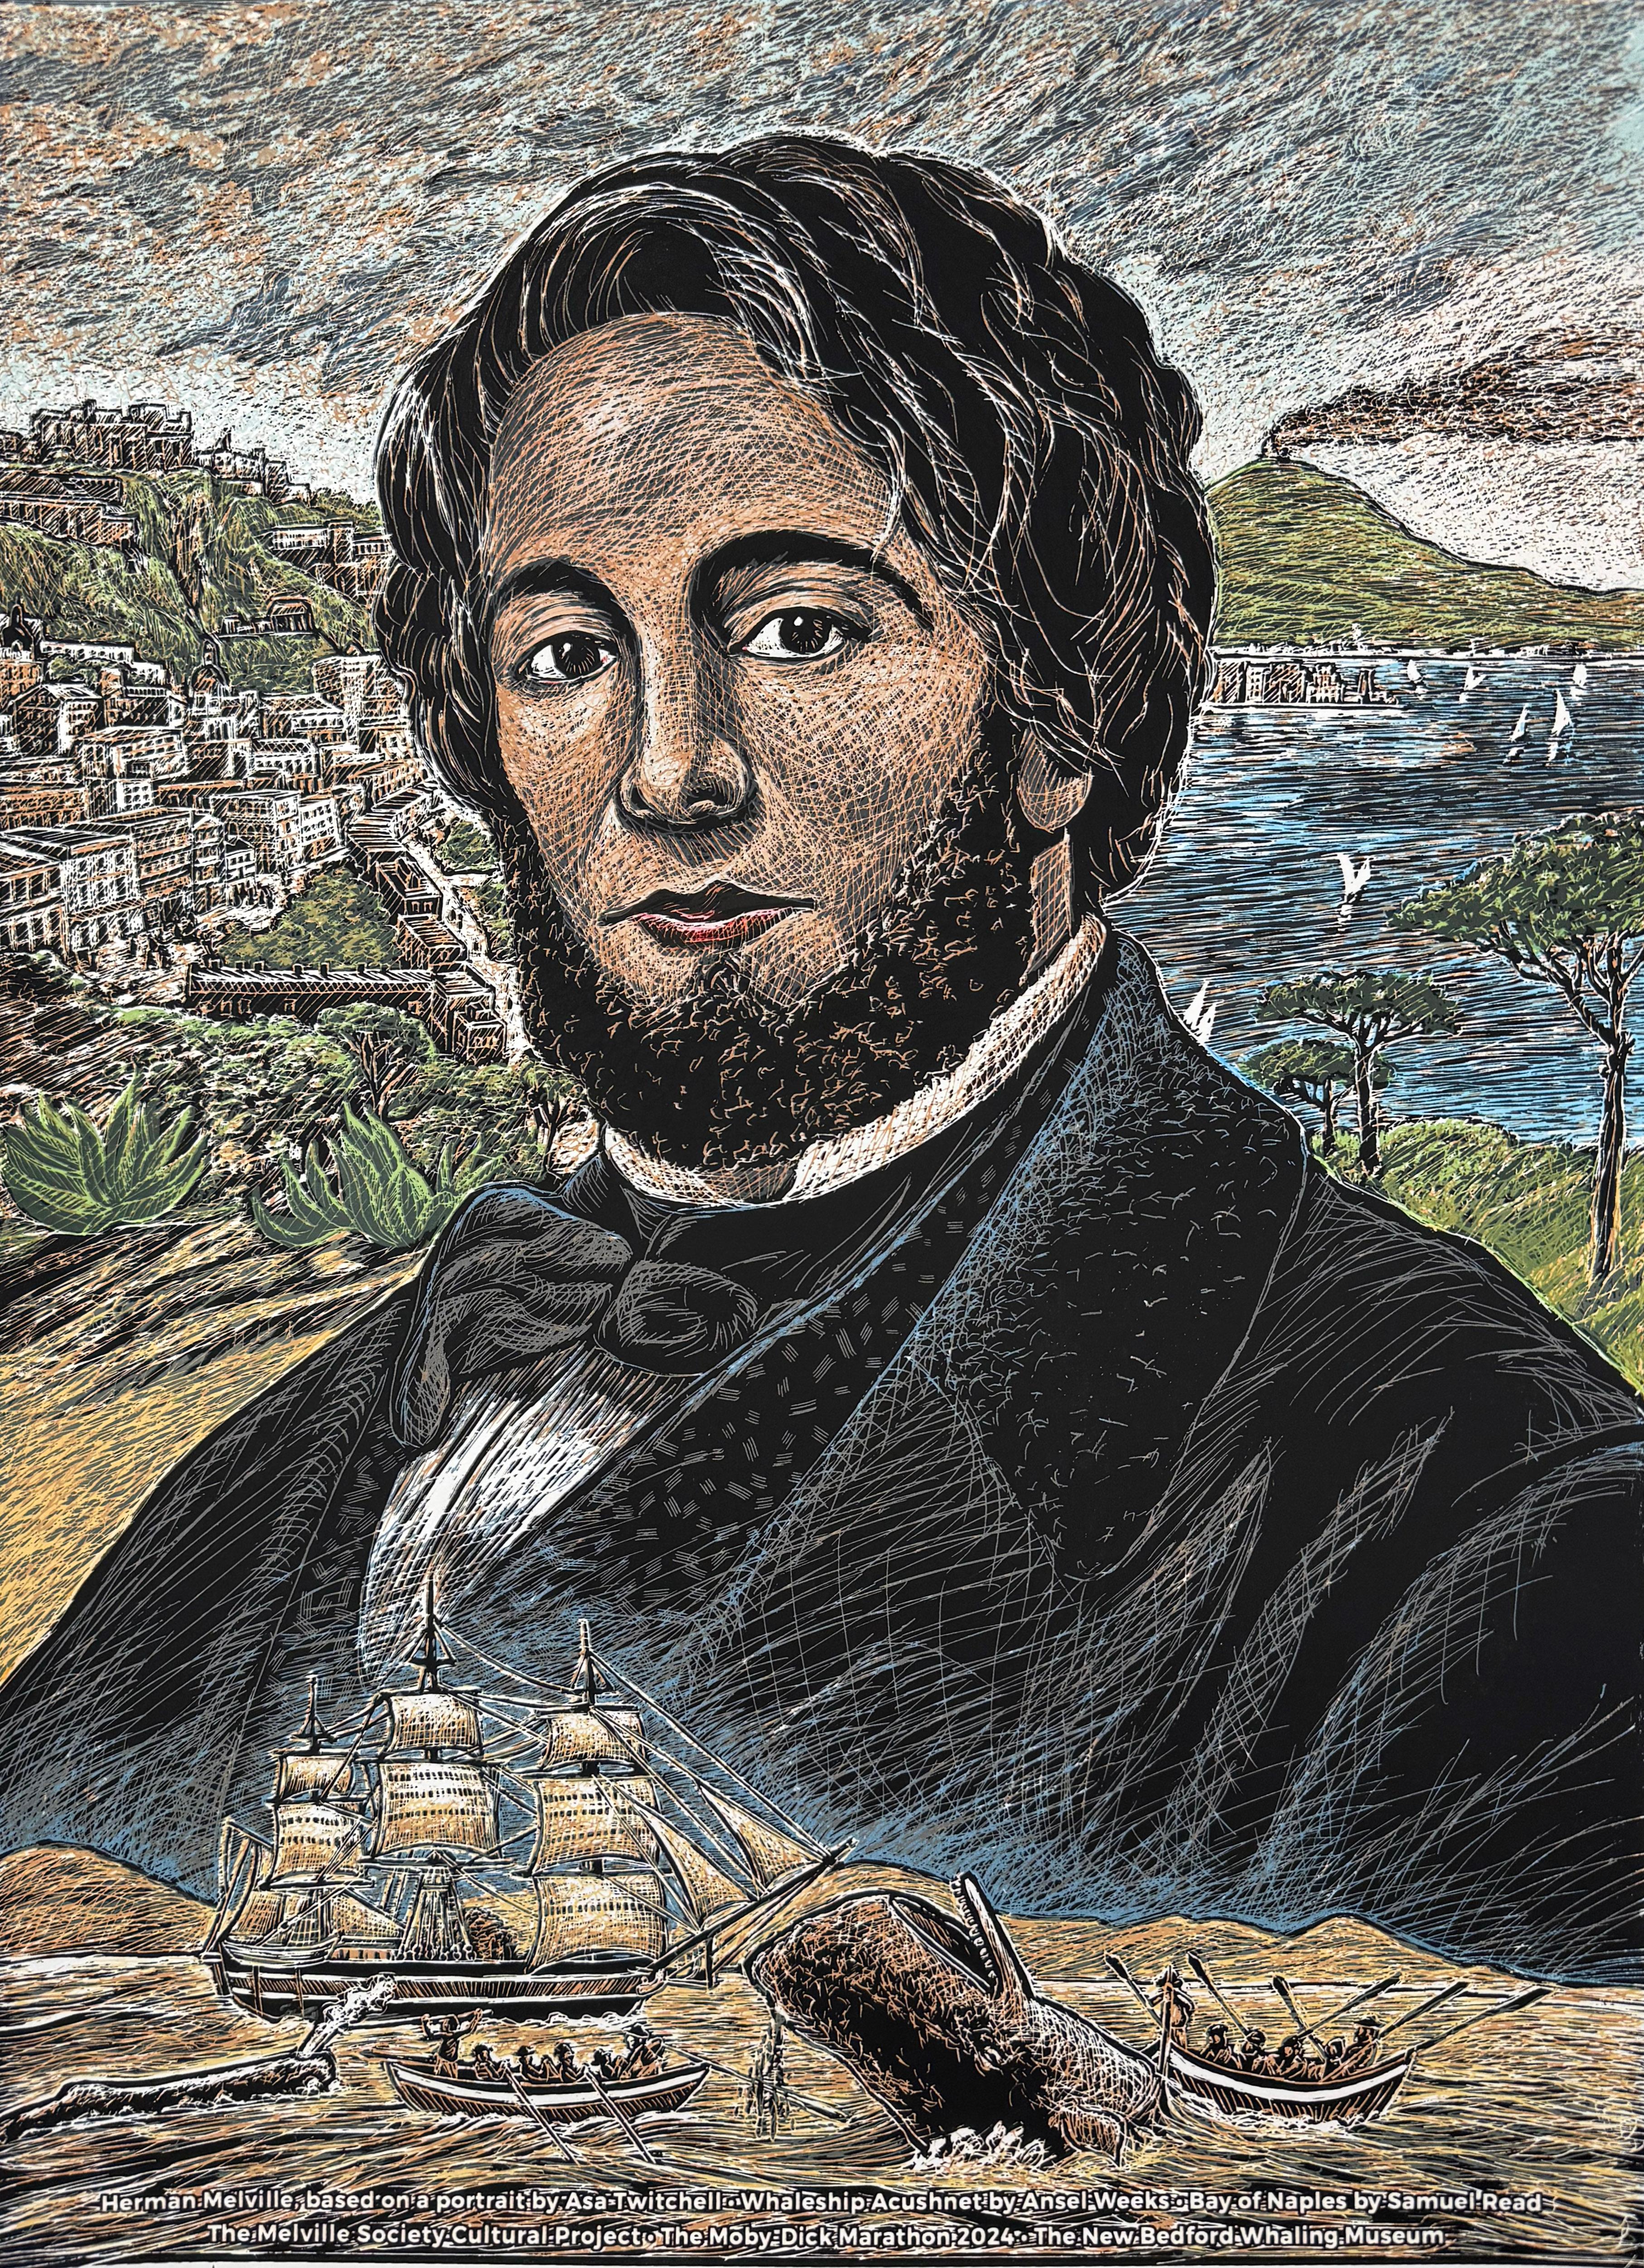 Portrait of Henry Melville, author of Moby Dick. The portrait is a companion piece to Or, The Whale (2019-20), a 14-by-51 foot scratchboard mural detailing the history and cost of American capitalism through the image of the whale. 

Medium: